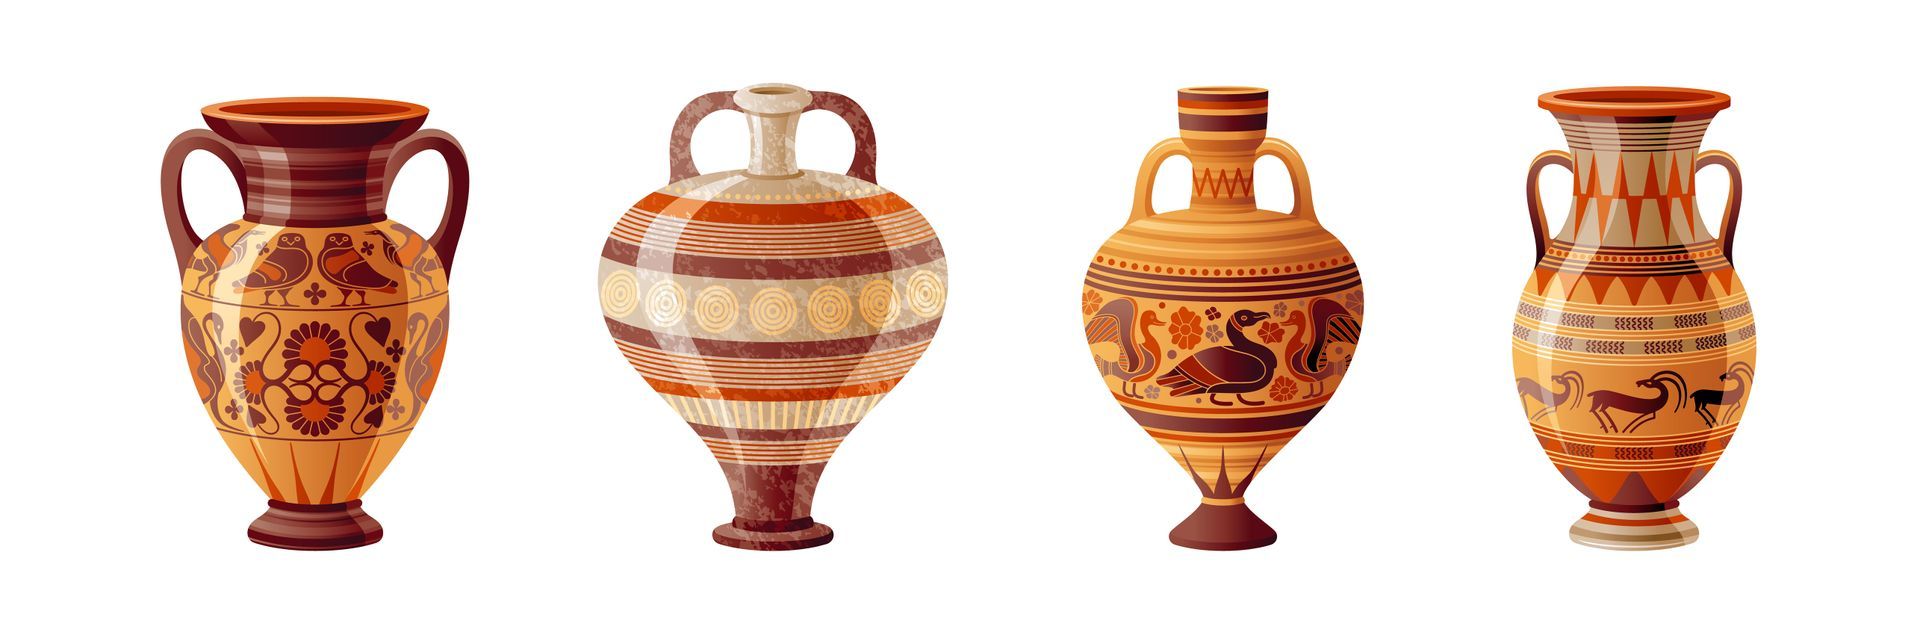 A set of four ancient greek vases on a white background.